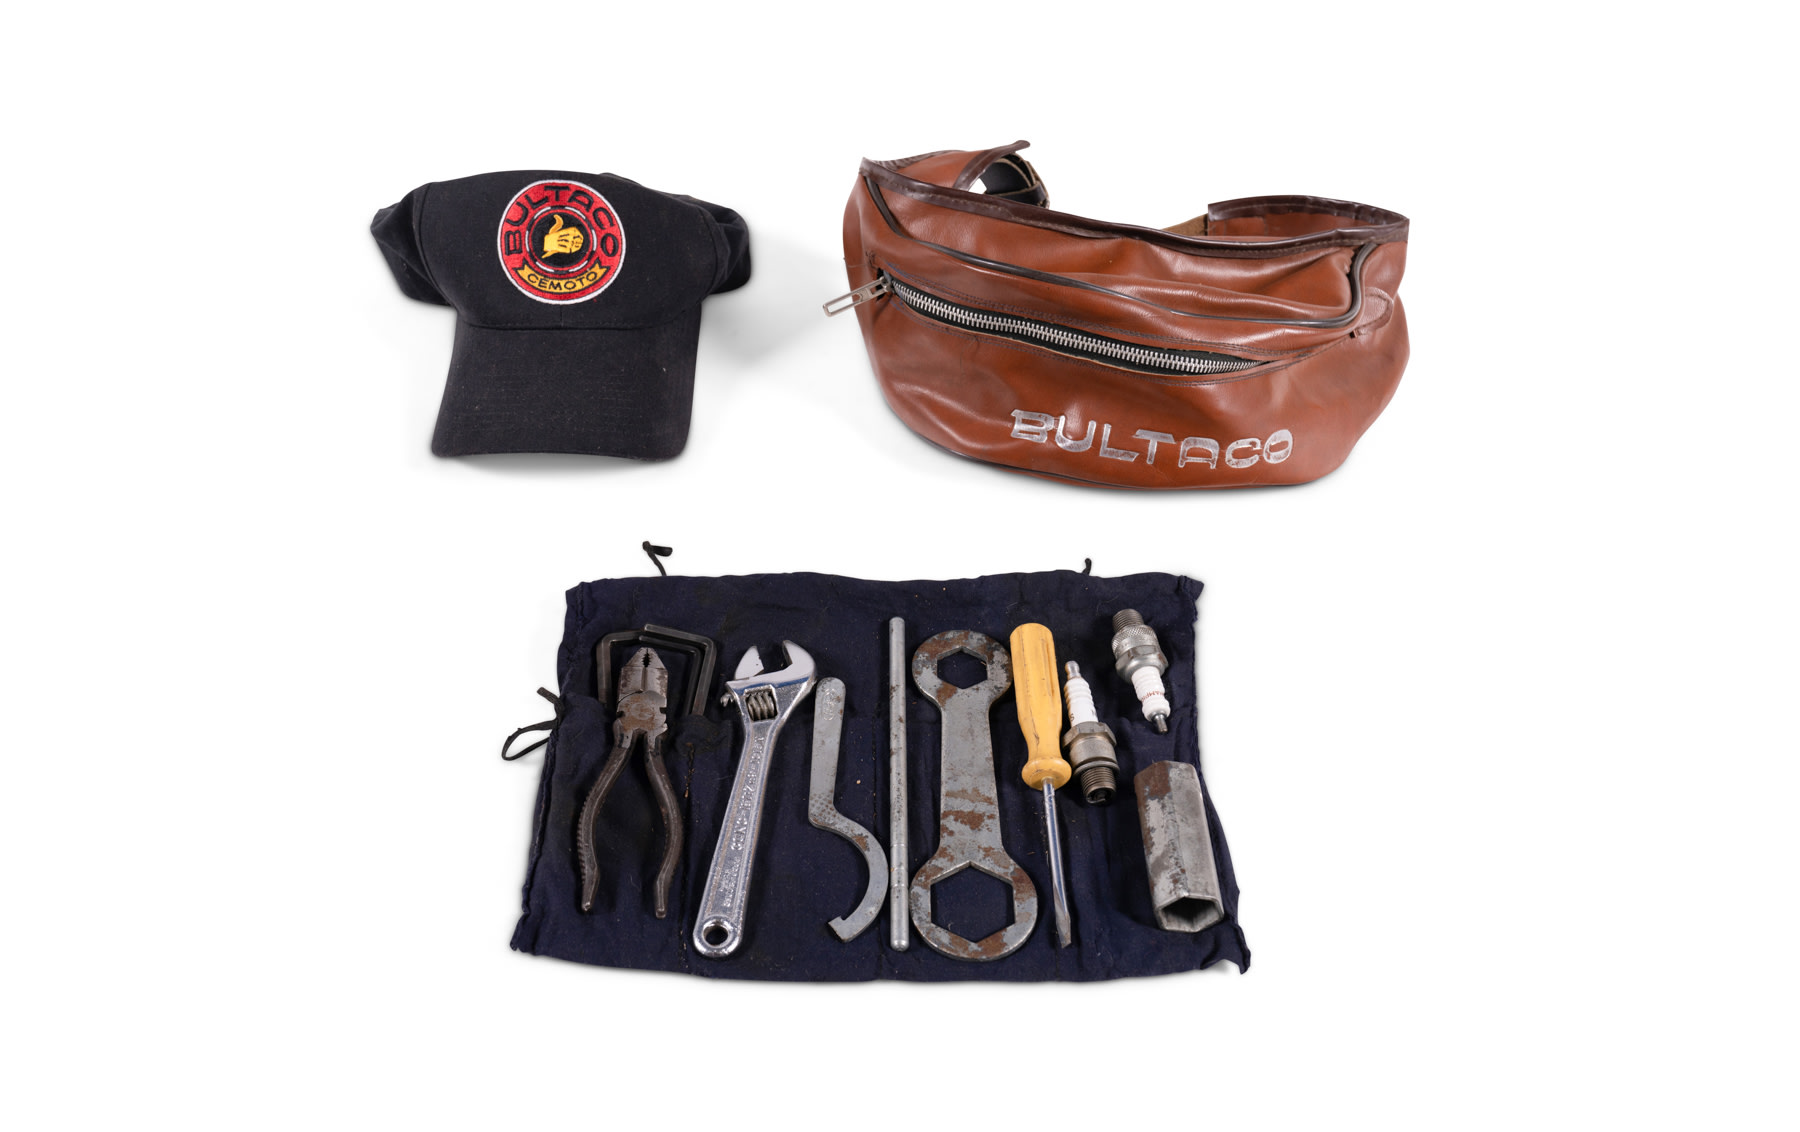 Bultaco Fanny Pack, Tool Kit, and Hat 